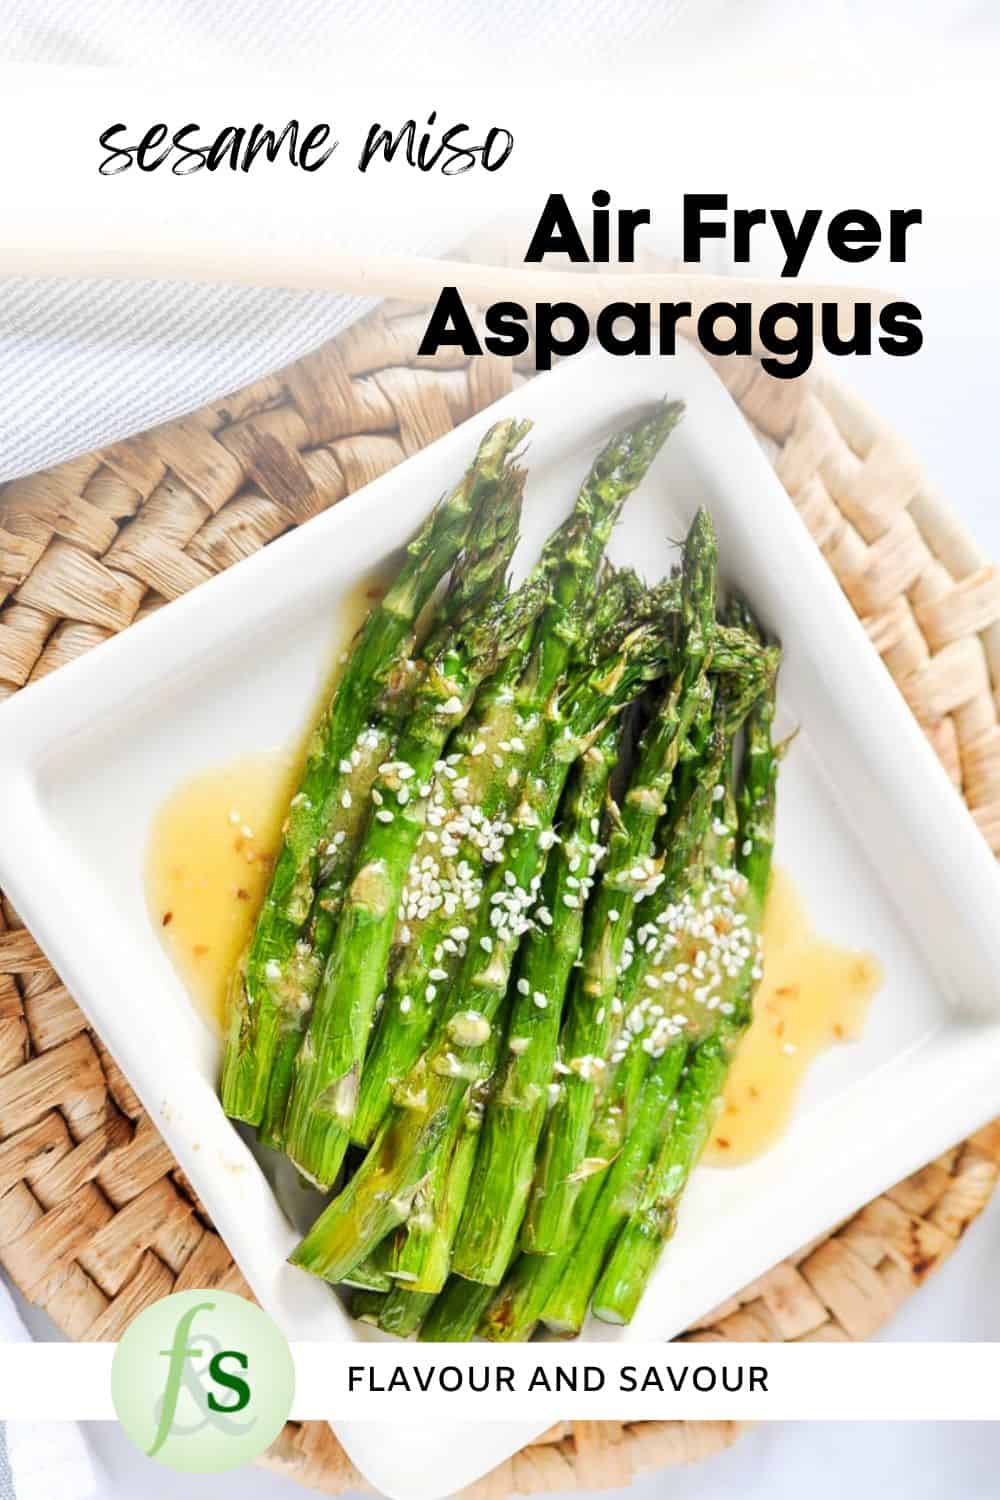 Image with text for sesame miso air fryer asparagus.